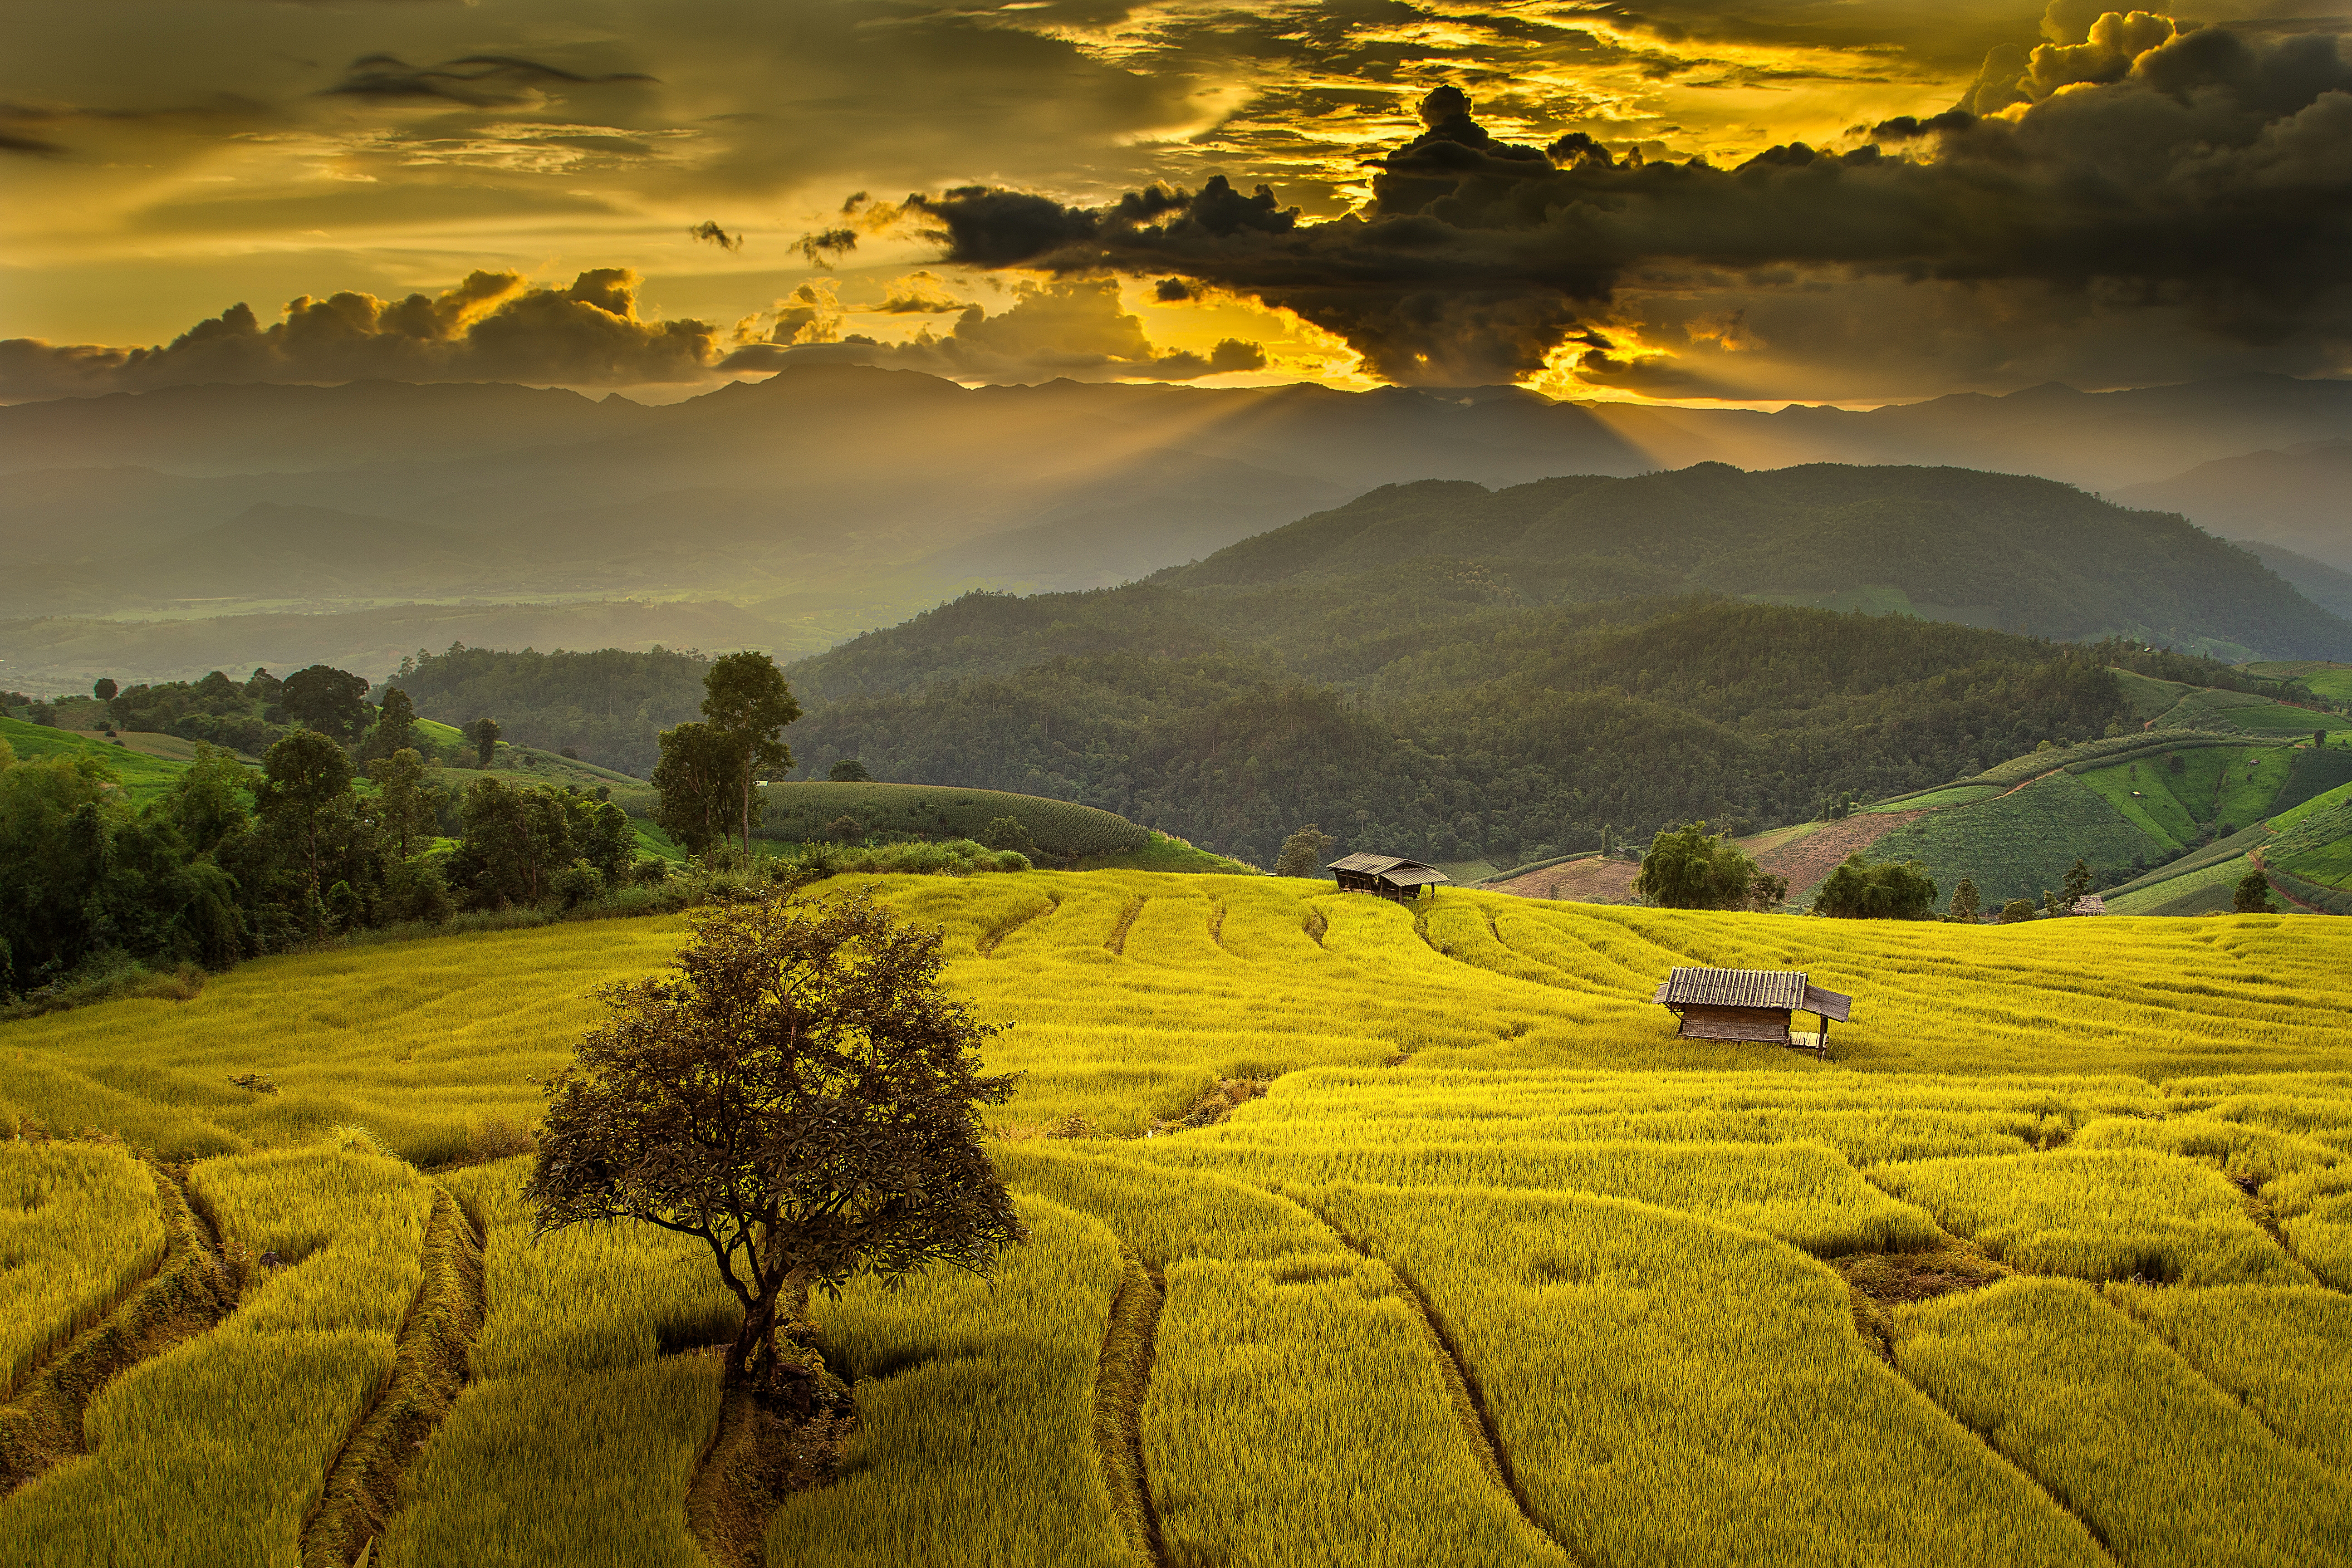 Wallpapers Ban Papongpieng Chiang mai Thailand on the desktop